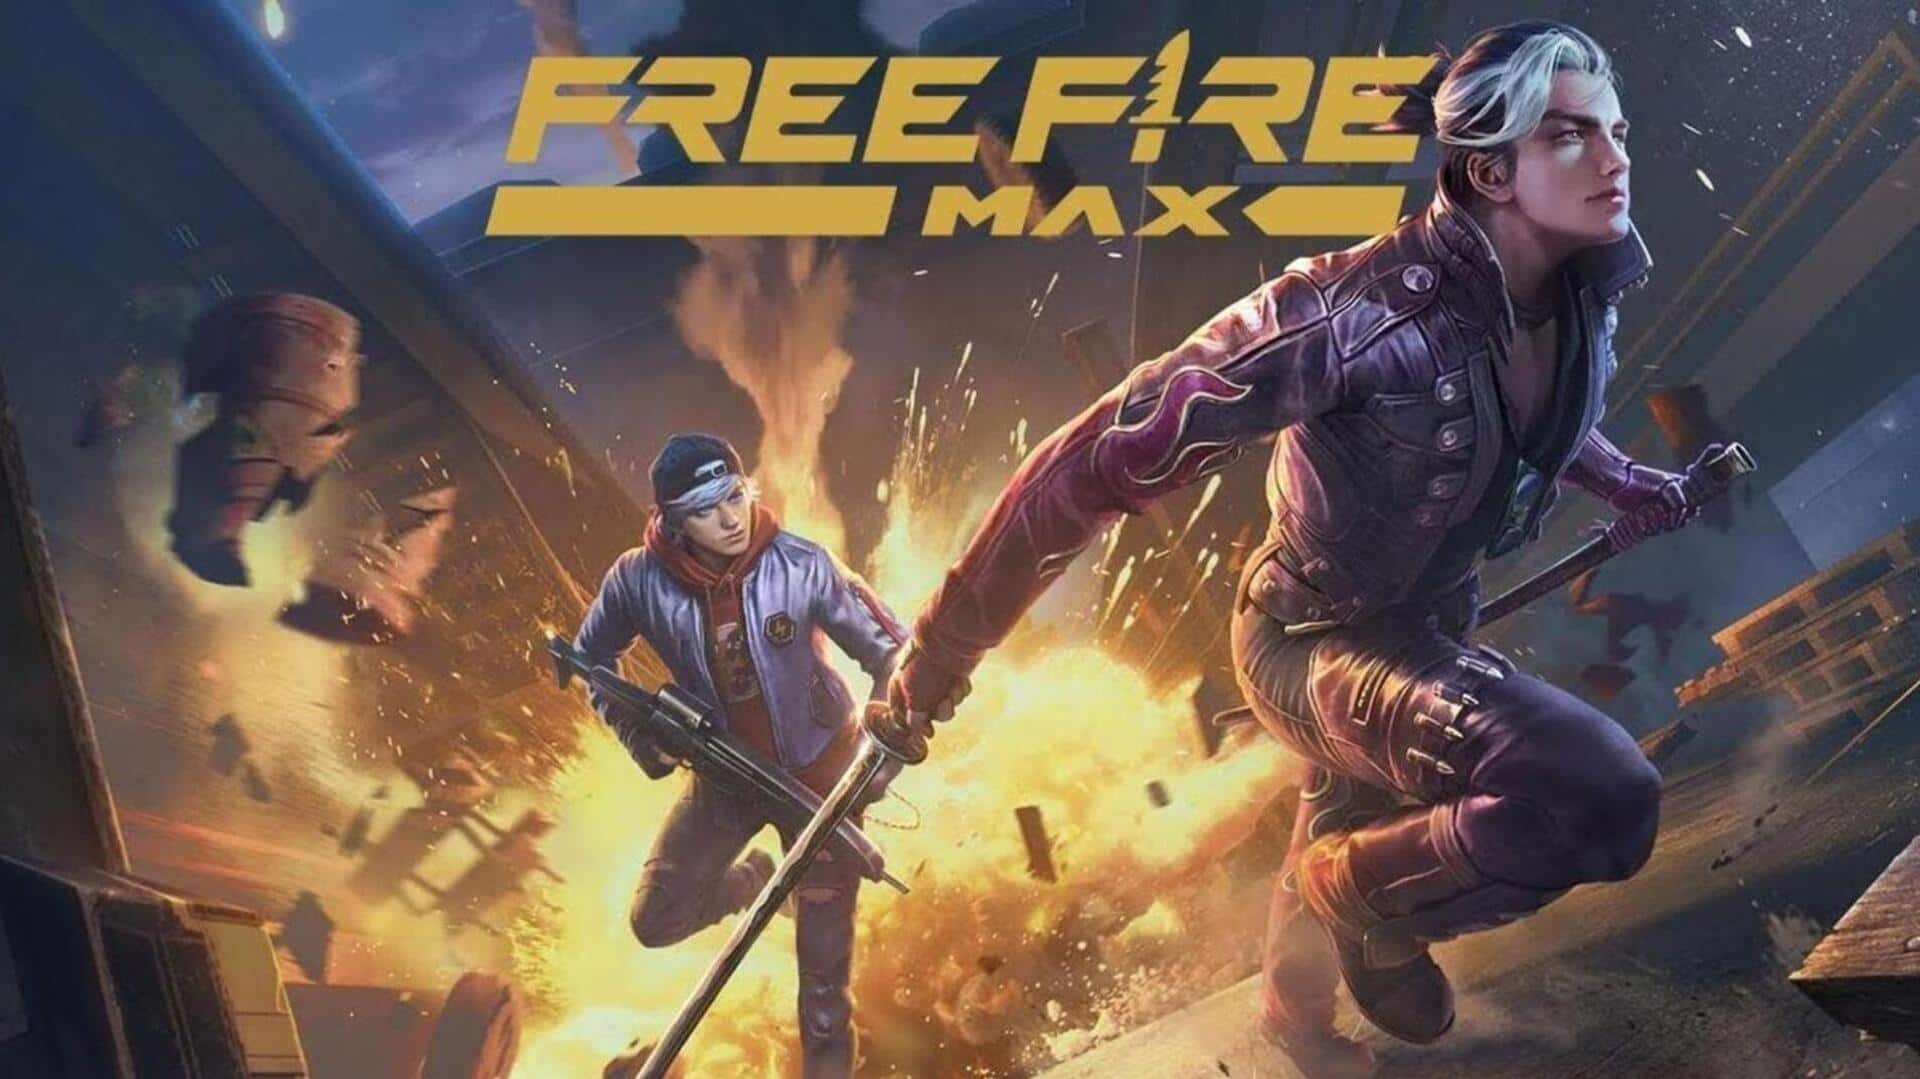 Garena Free Fire MAX releases redeem codes for November 12